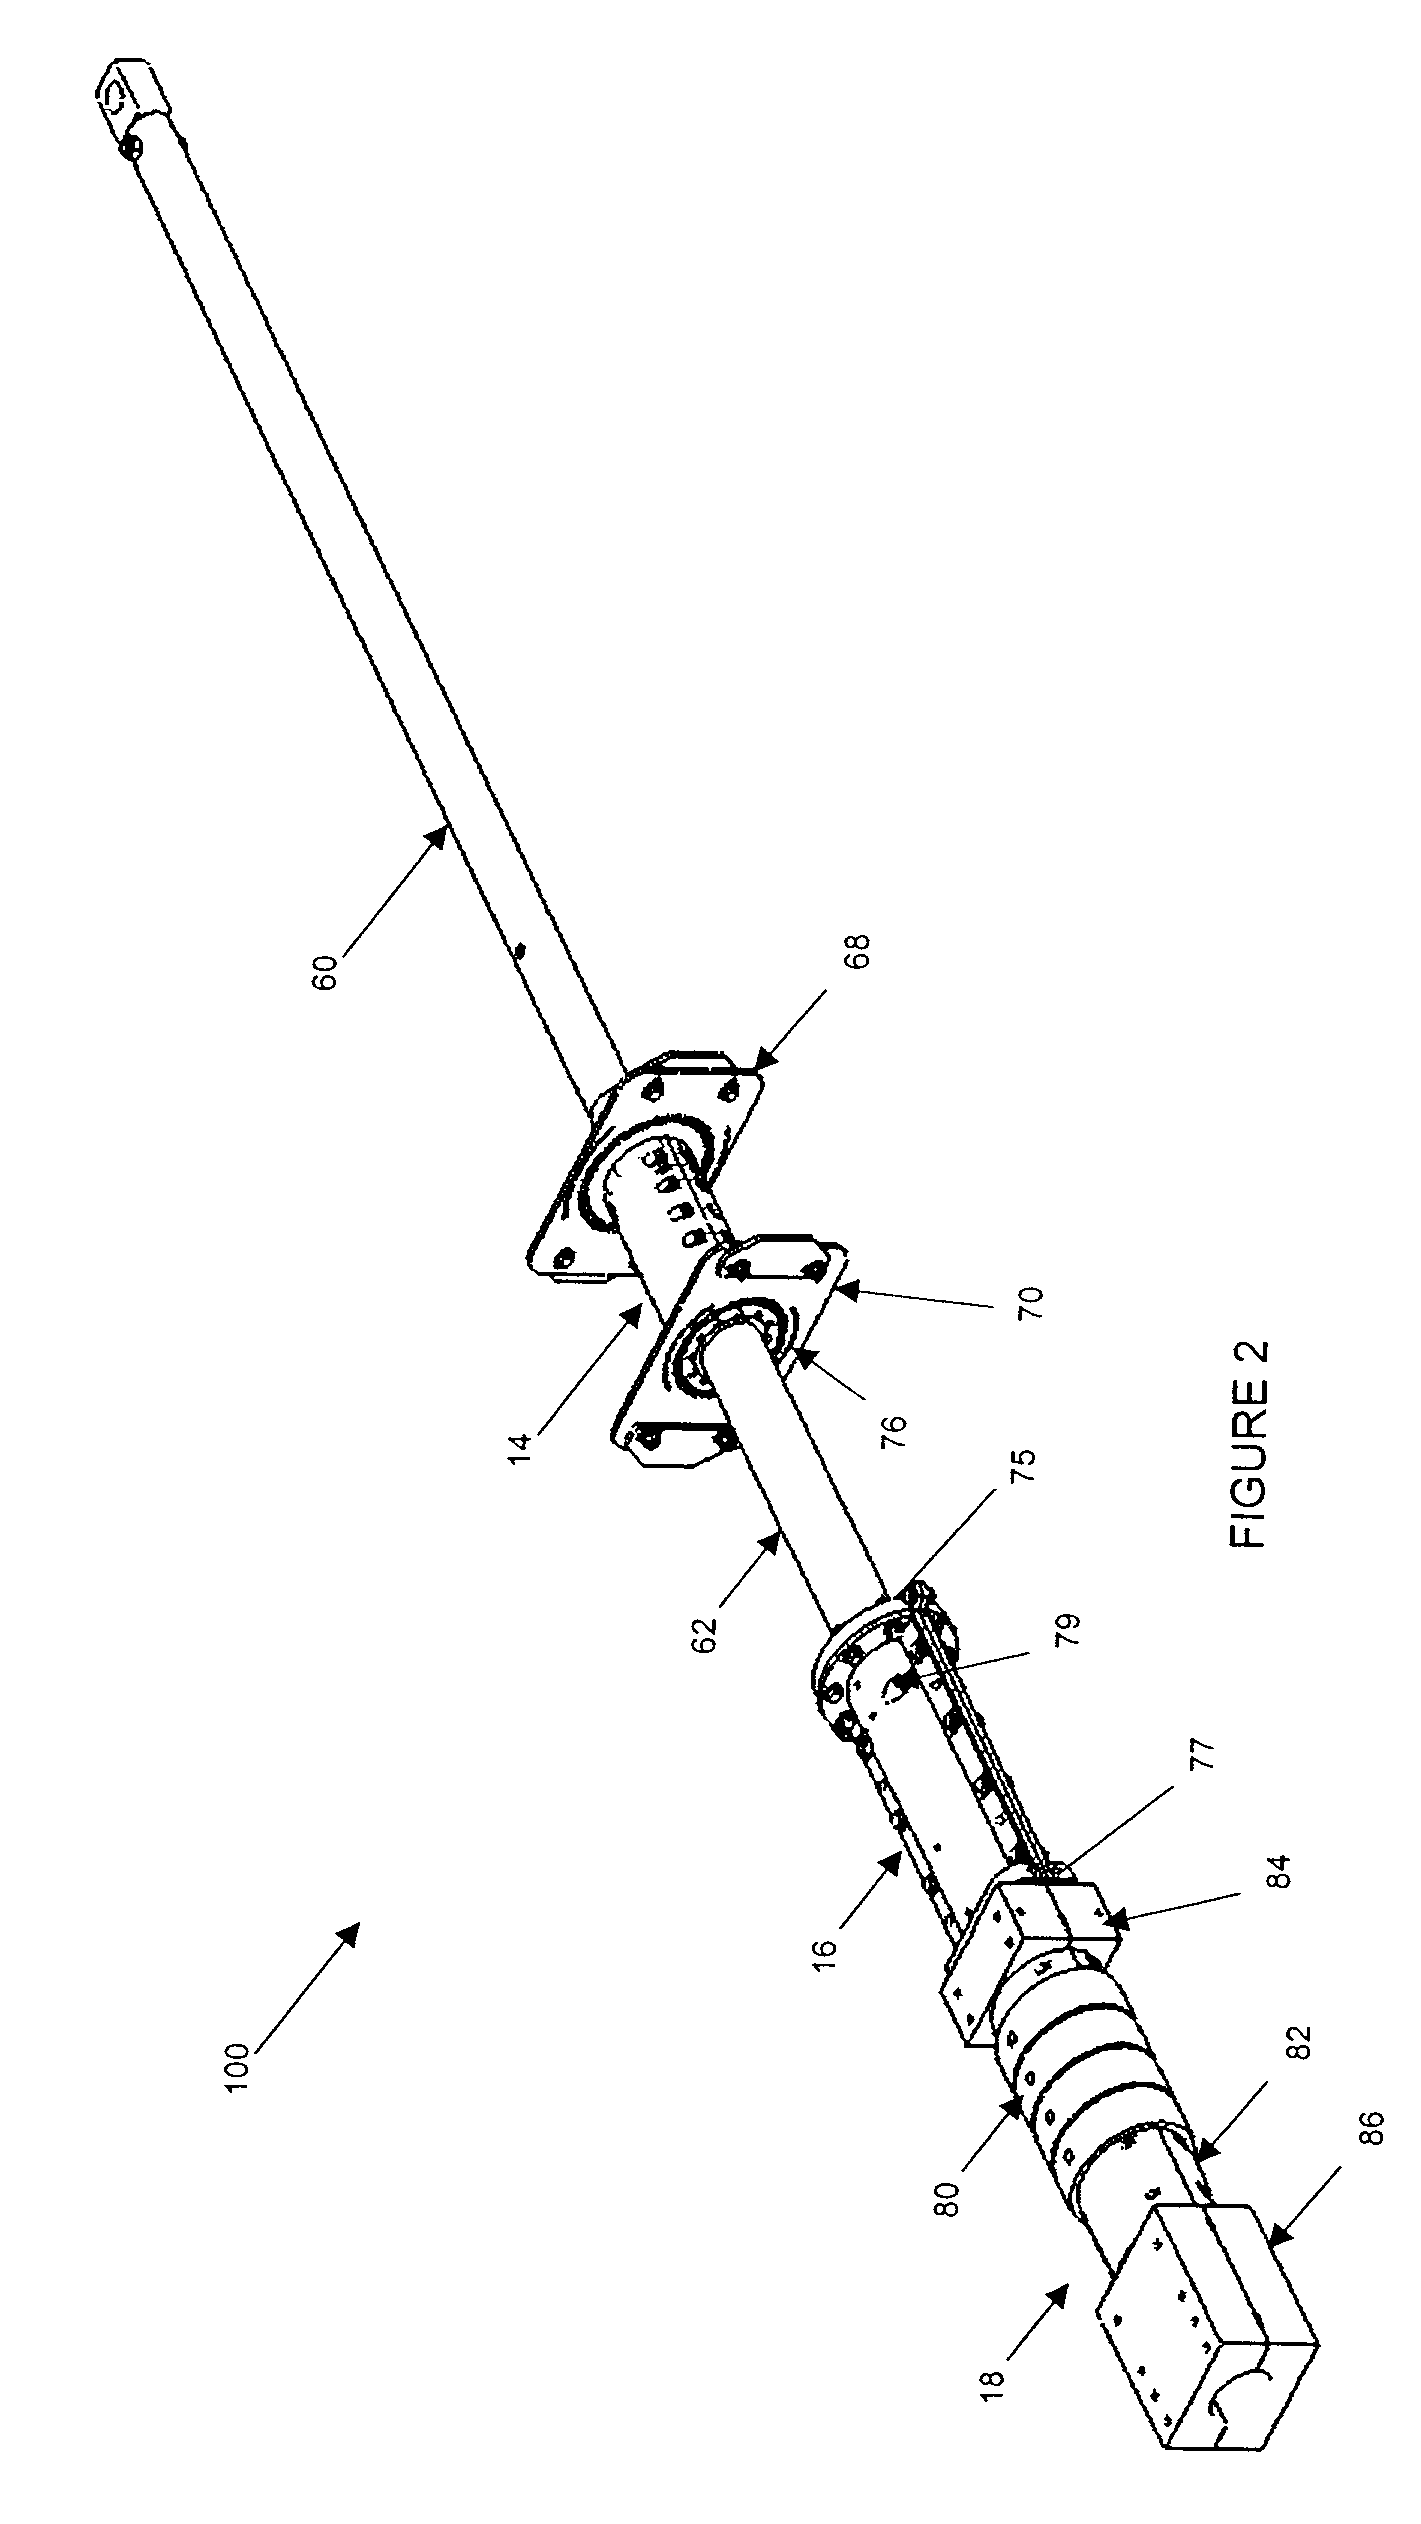 Method of Pultrusion Employing Multiple Resins